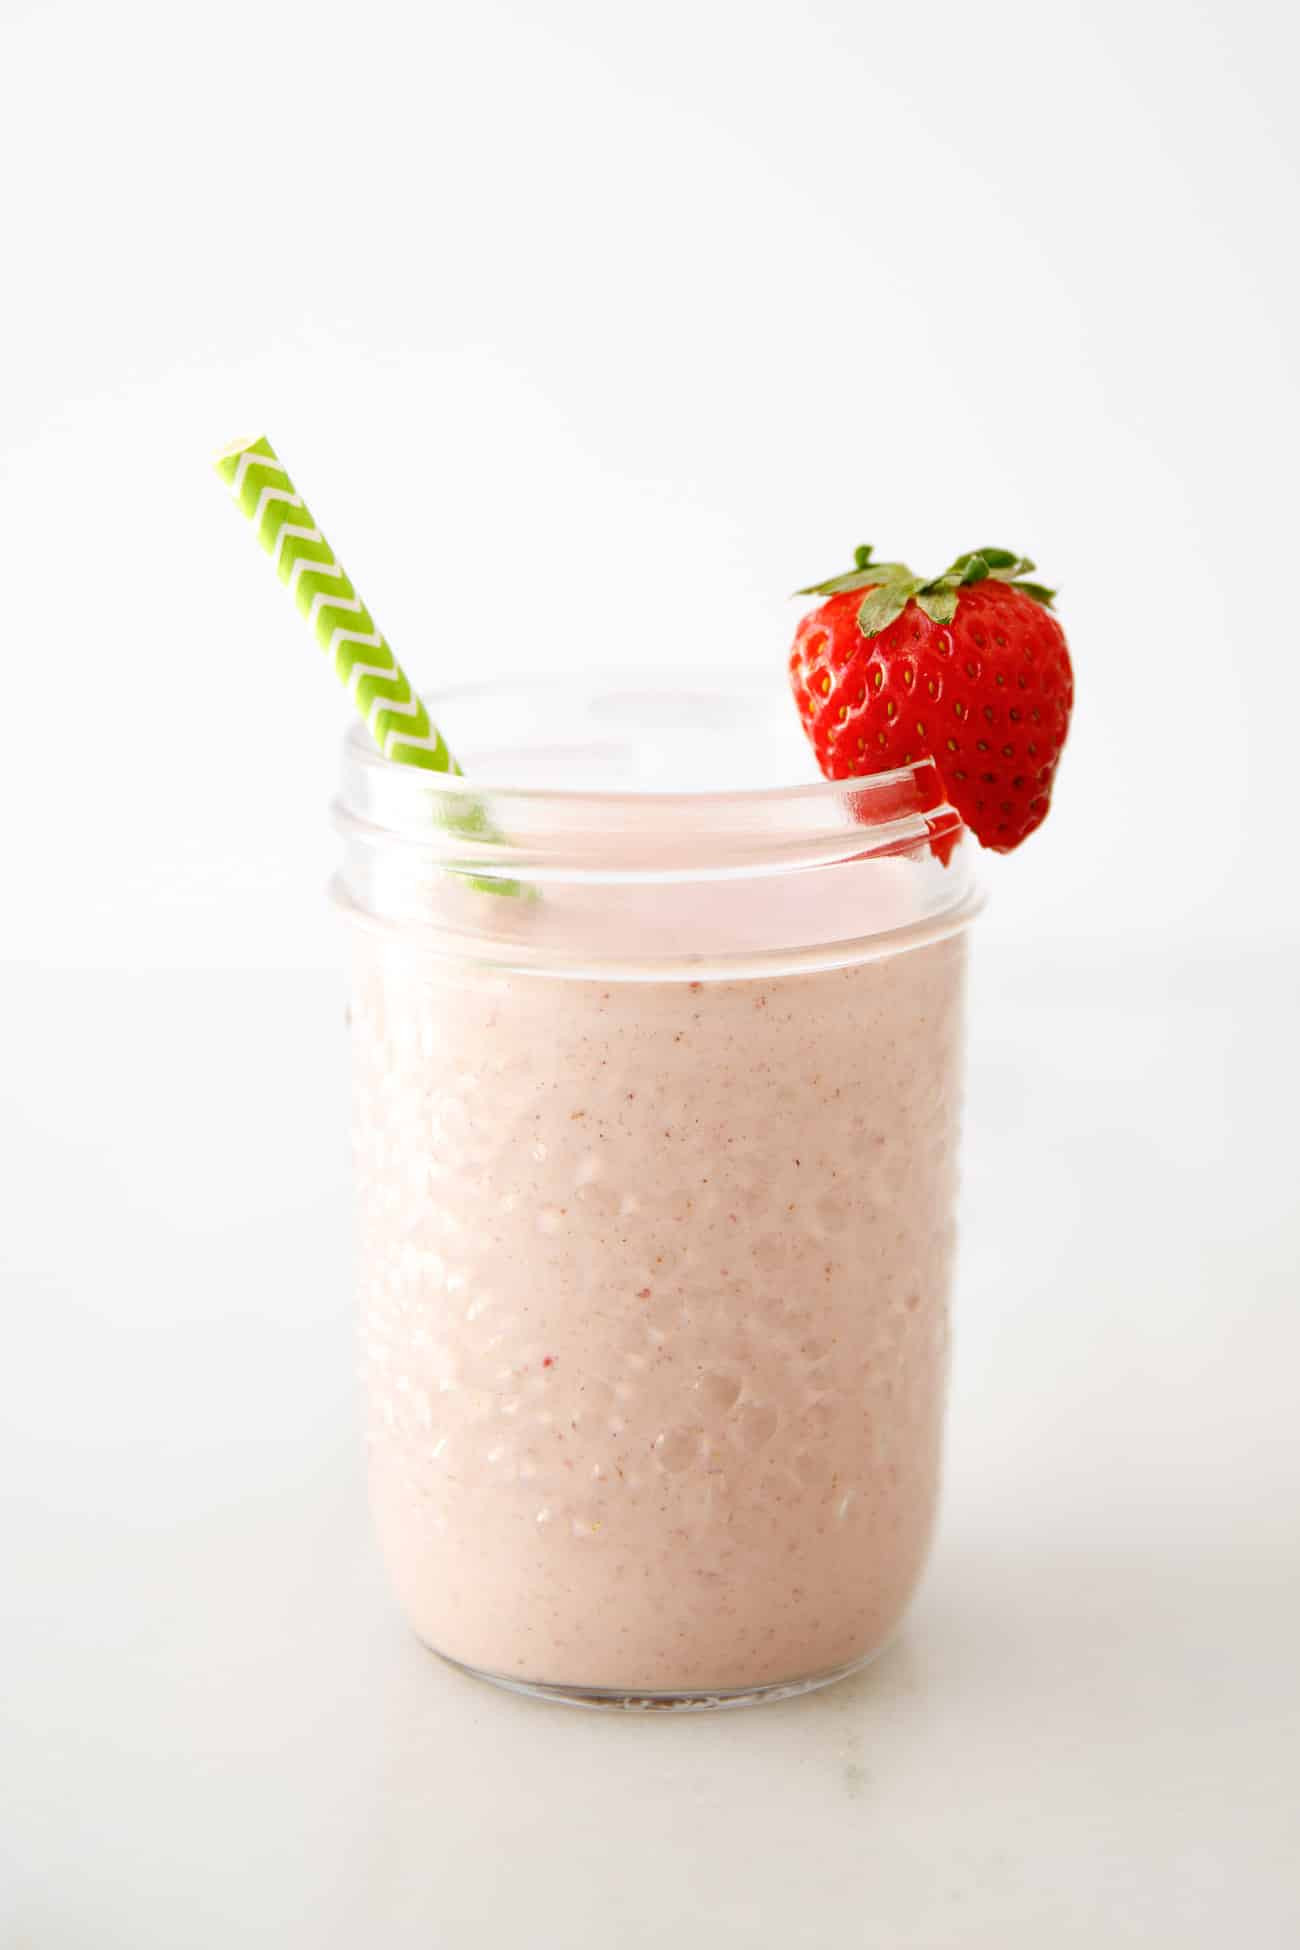 Healthy Breakfast Smoothies For Kids
 Healthy Breakfast Smoothies for Kids